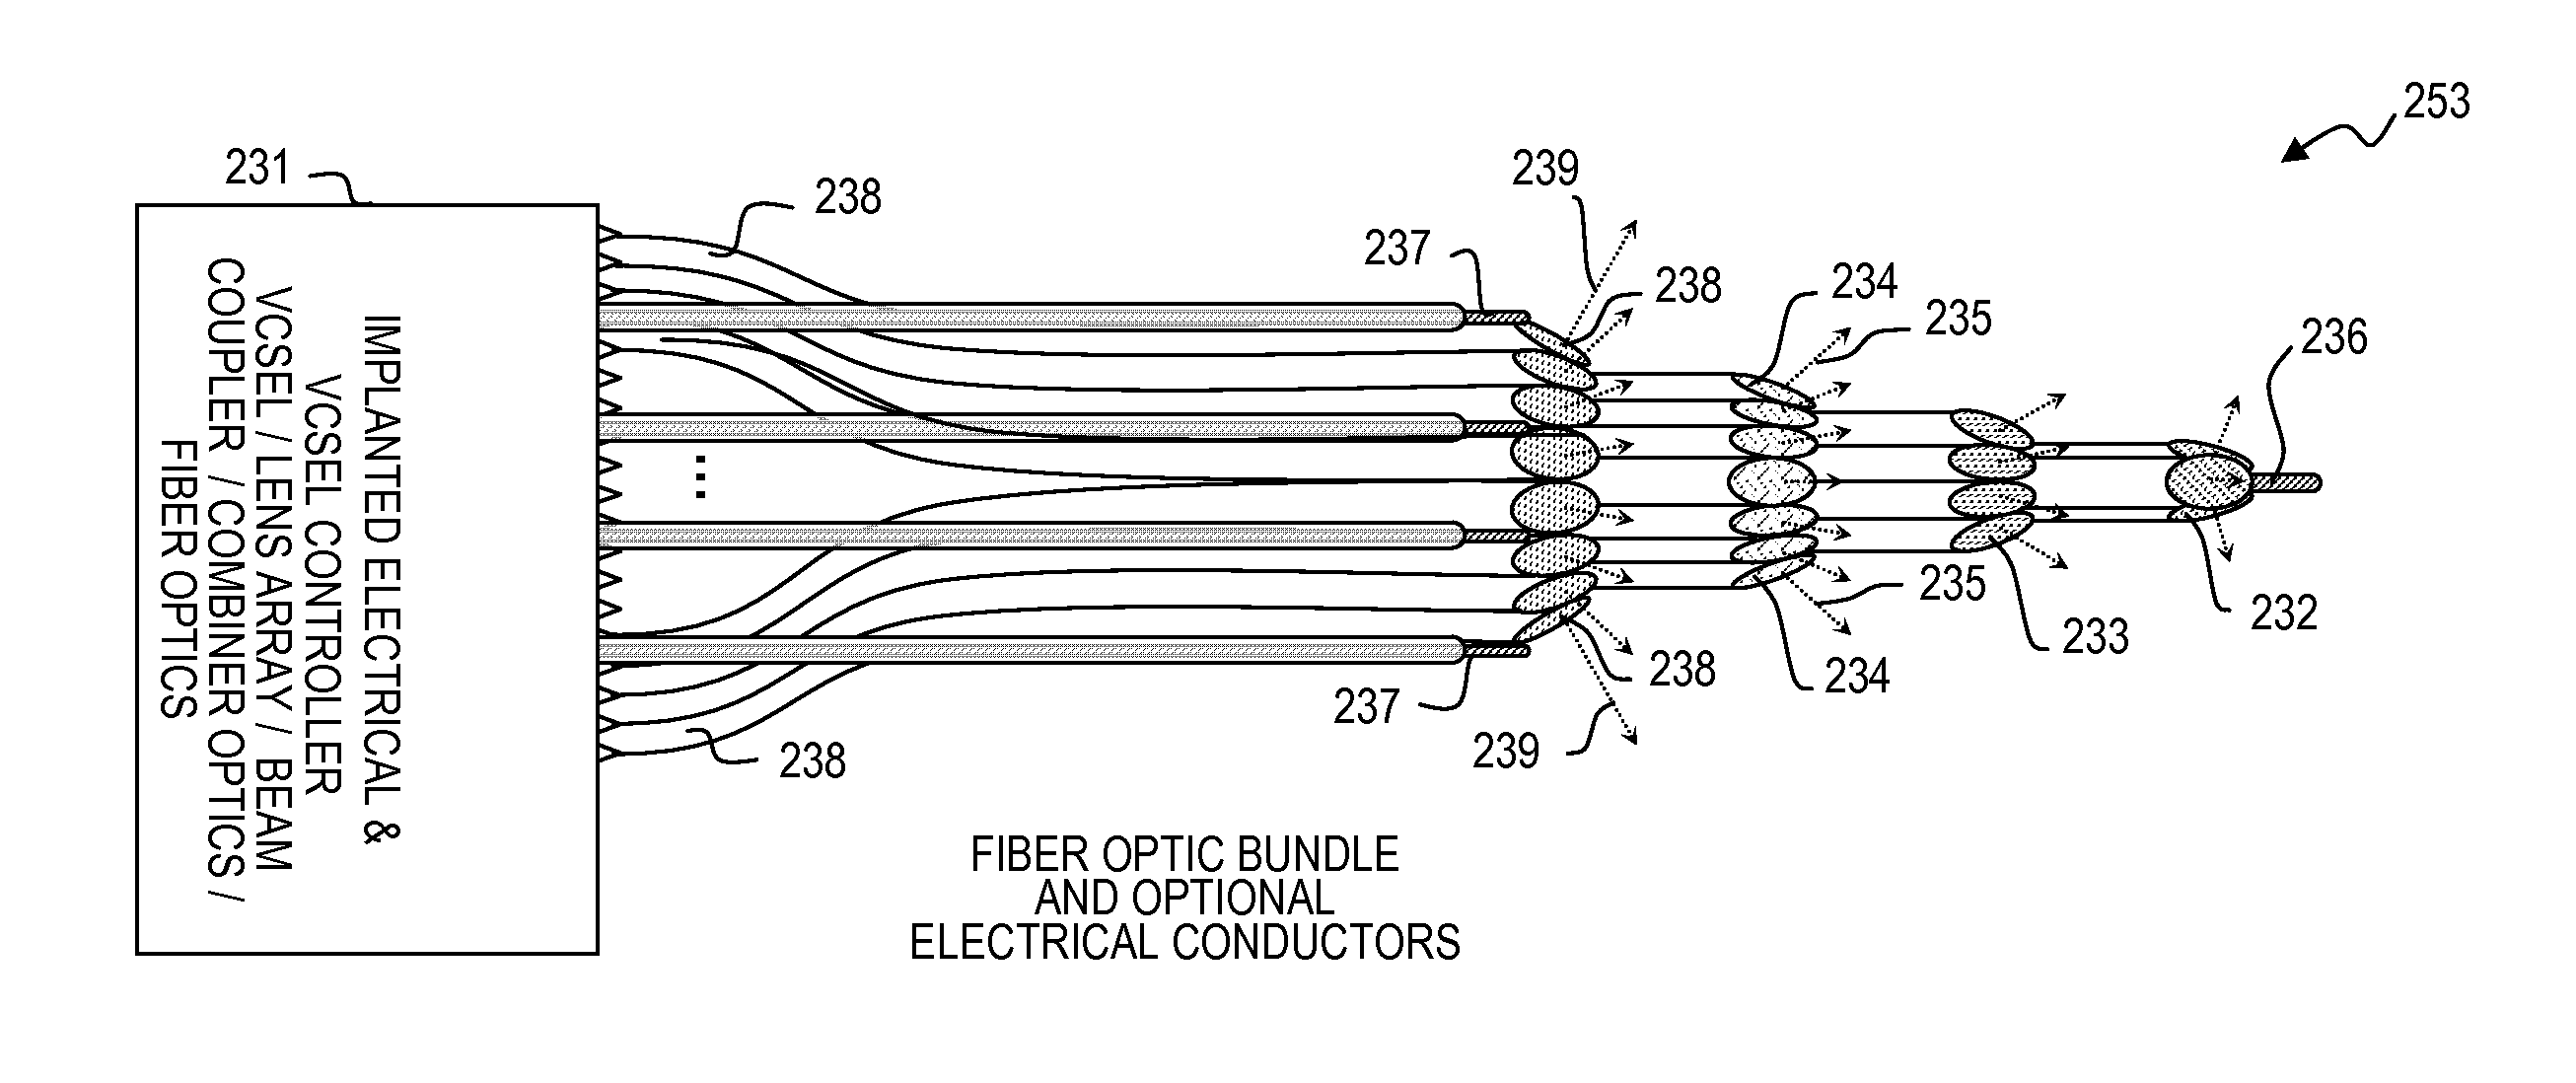 Nerve-penetrating apparatus and method for optical and/or electrical nerve stimulation of peripheral nerves